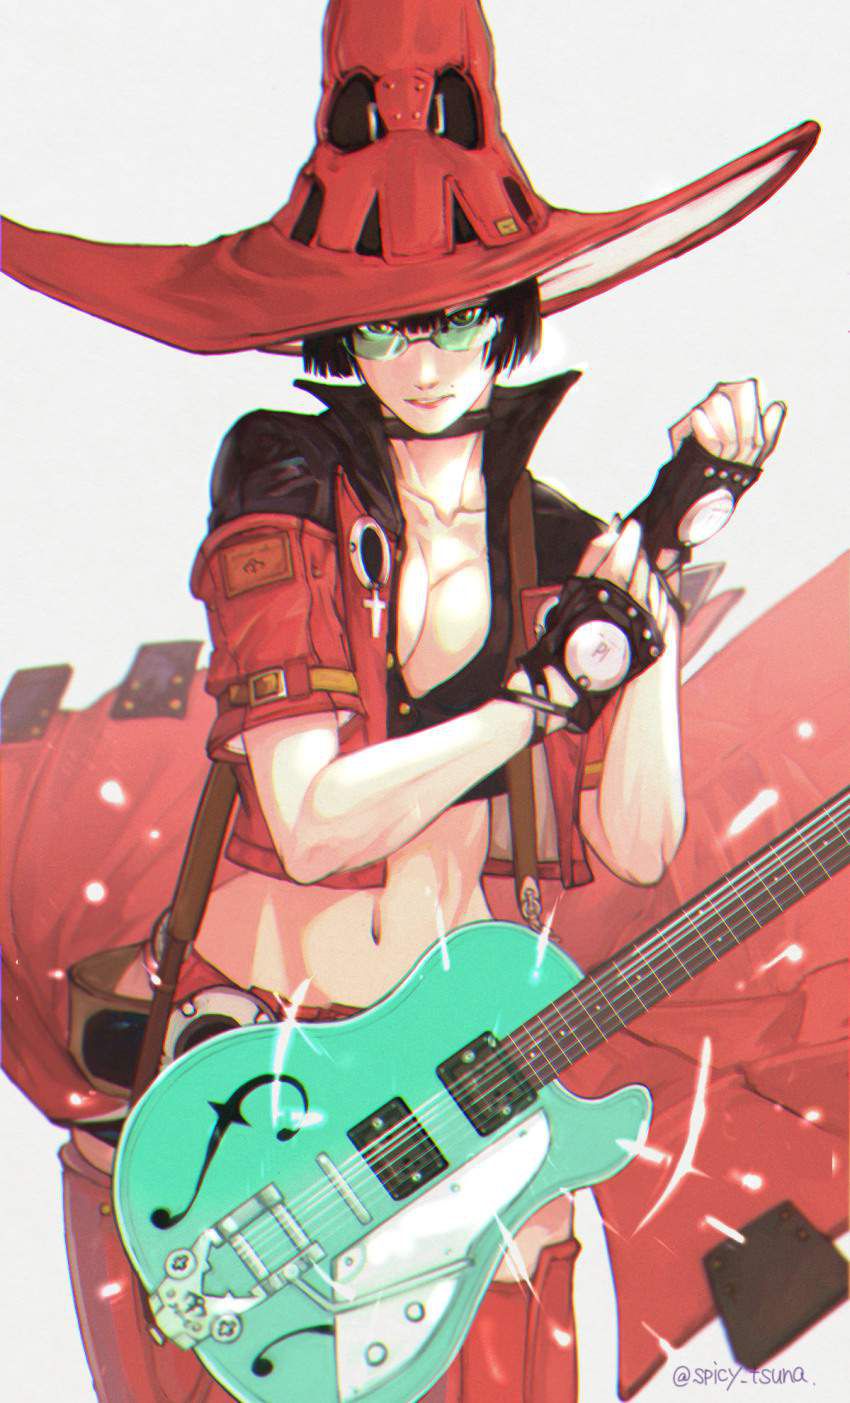 Secondary fetish image of Guilty Gear. 14